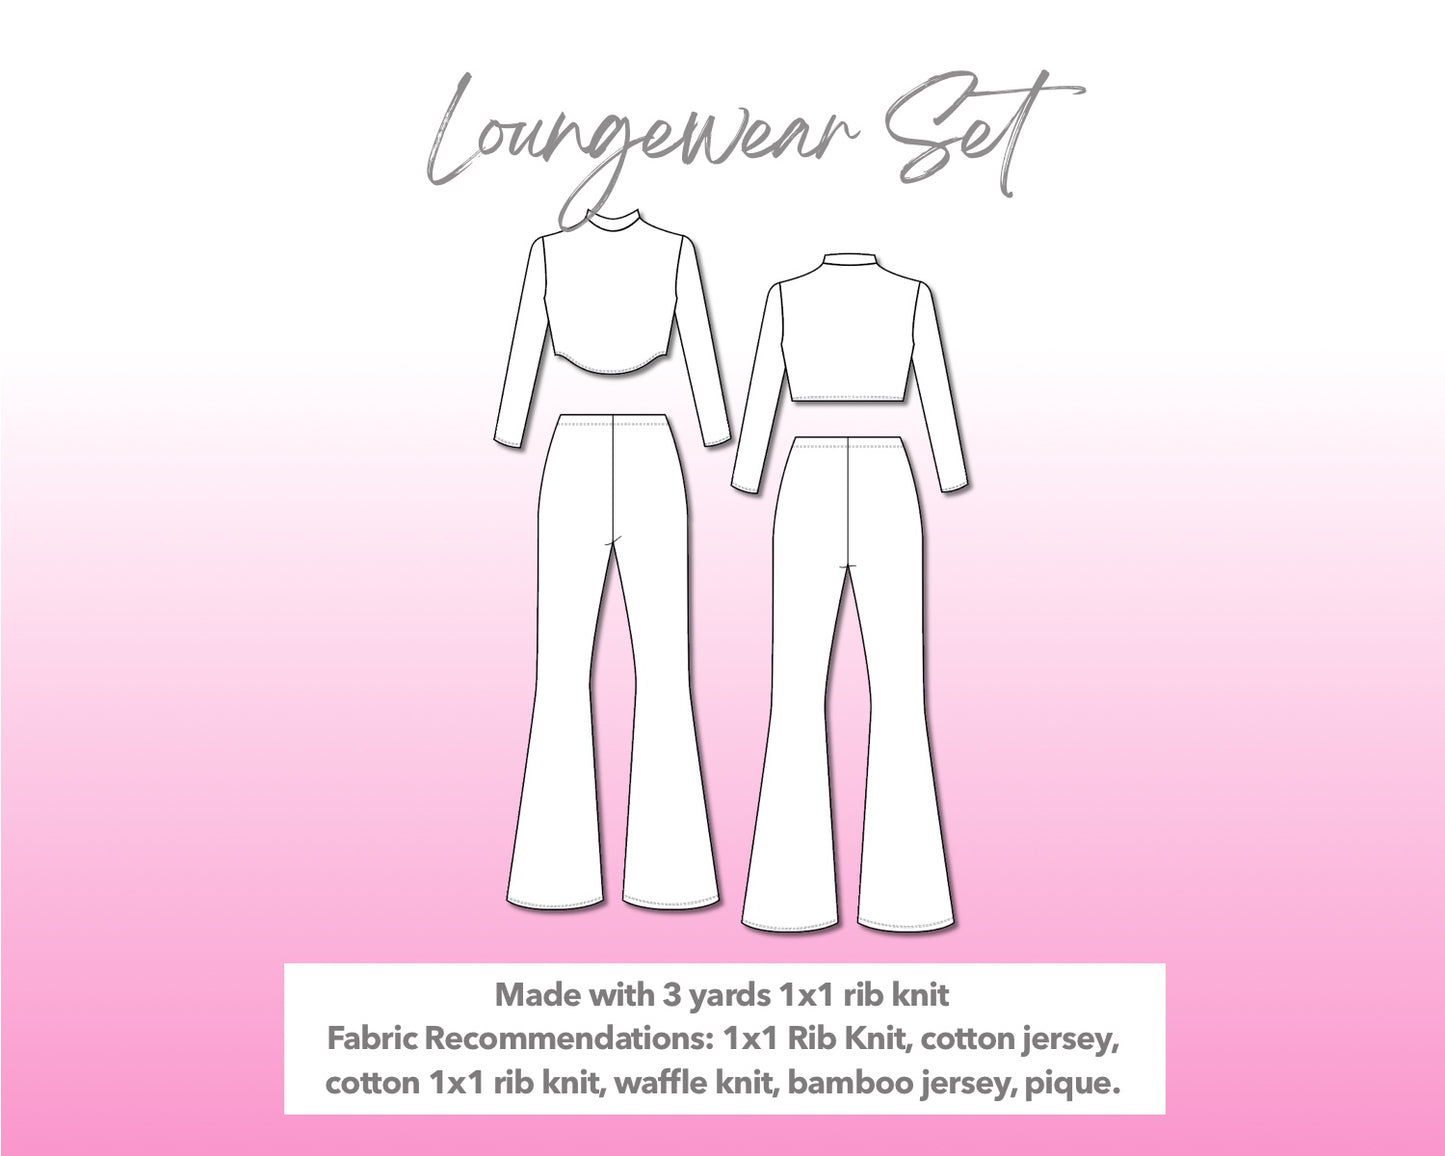 Illustration and detailed description for Loungewear Turtleneck Crop Top and Flare Leg Pants Set sewing pattern.